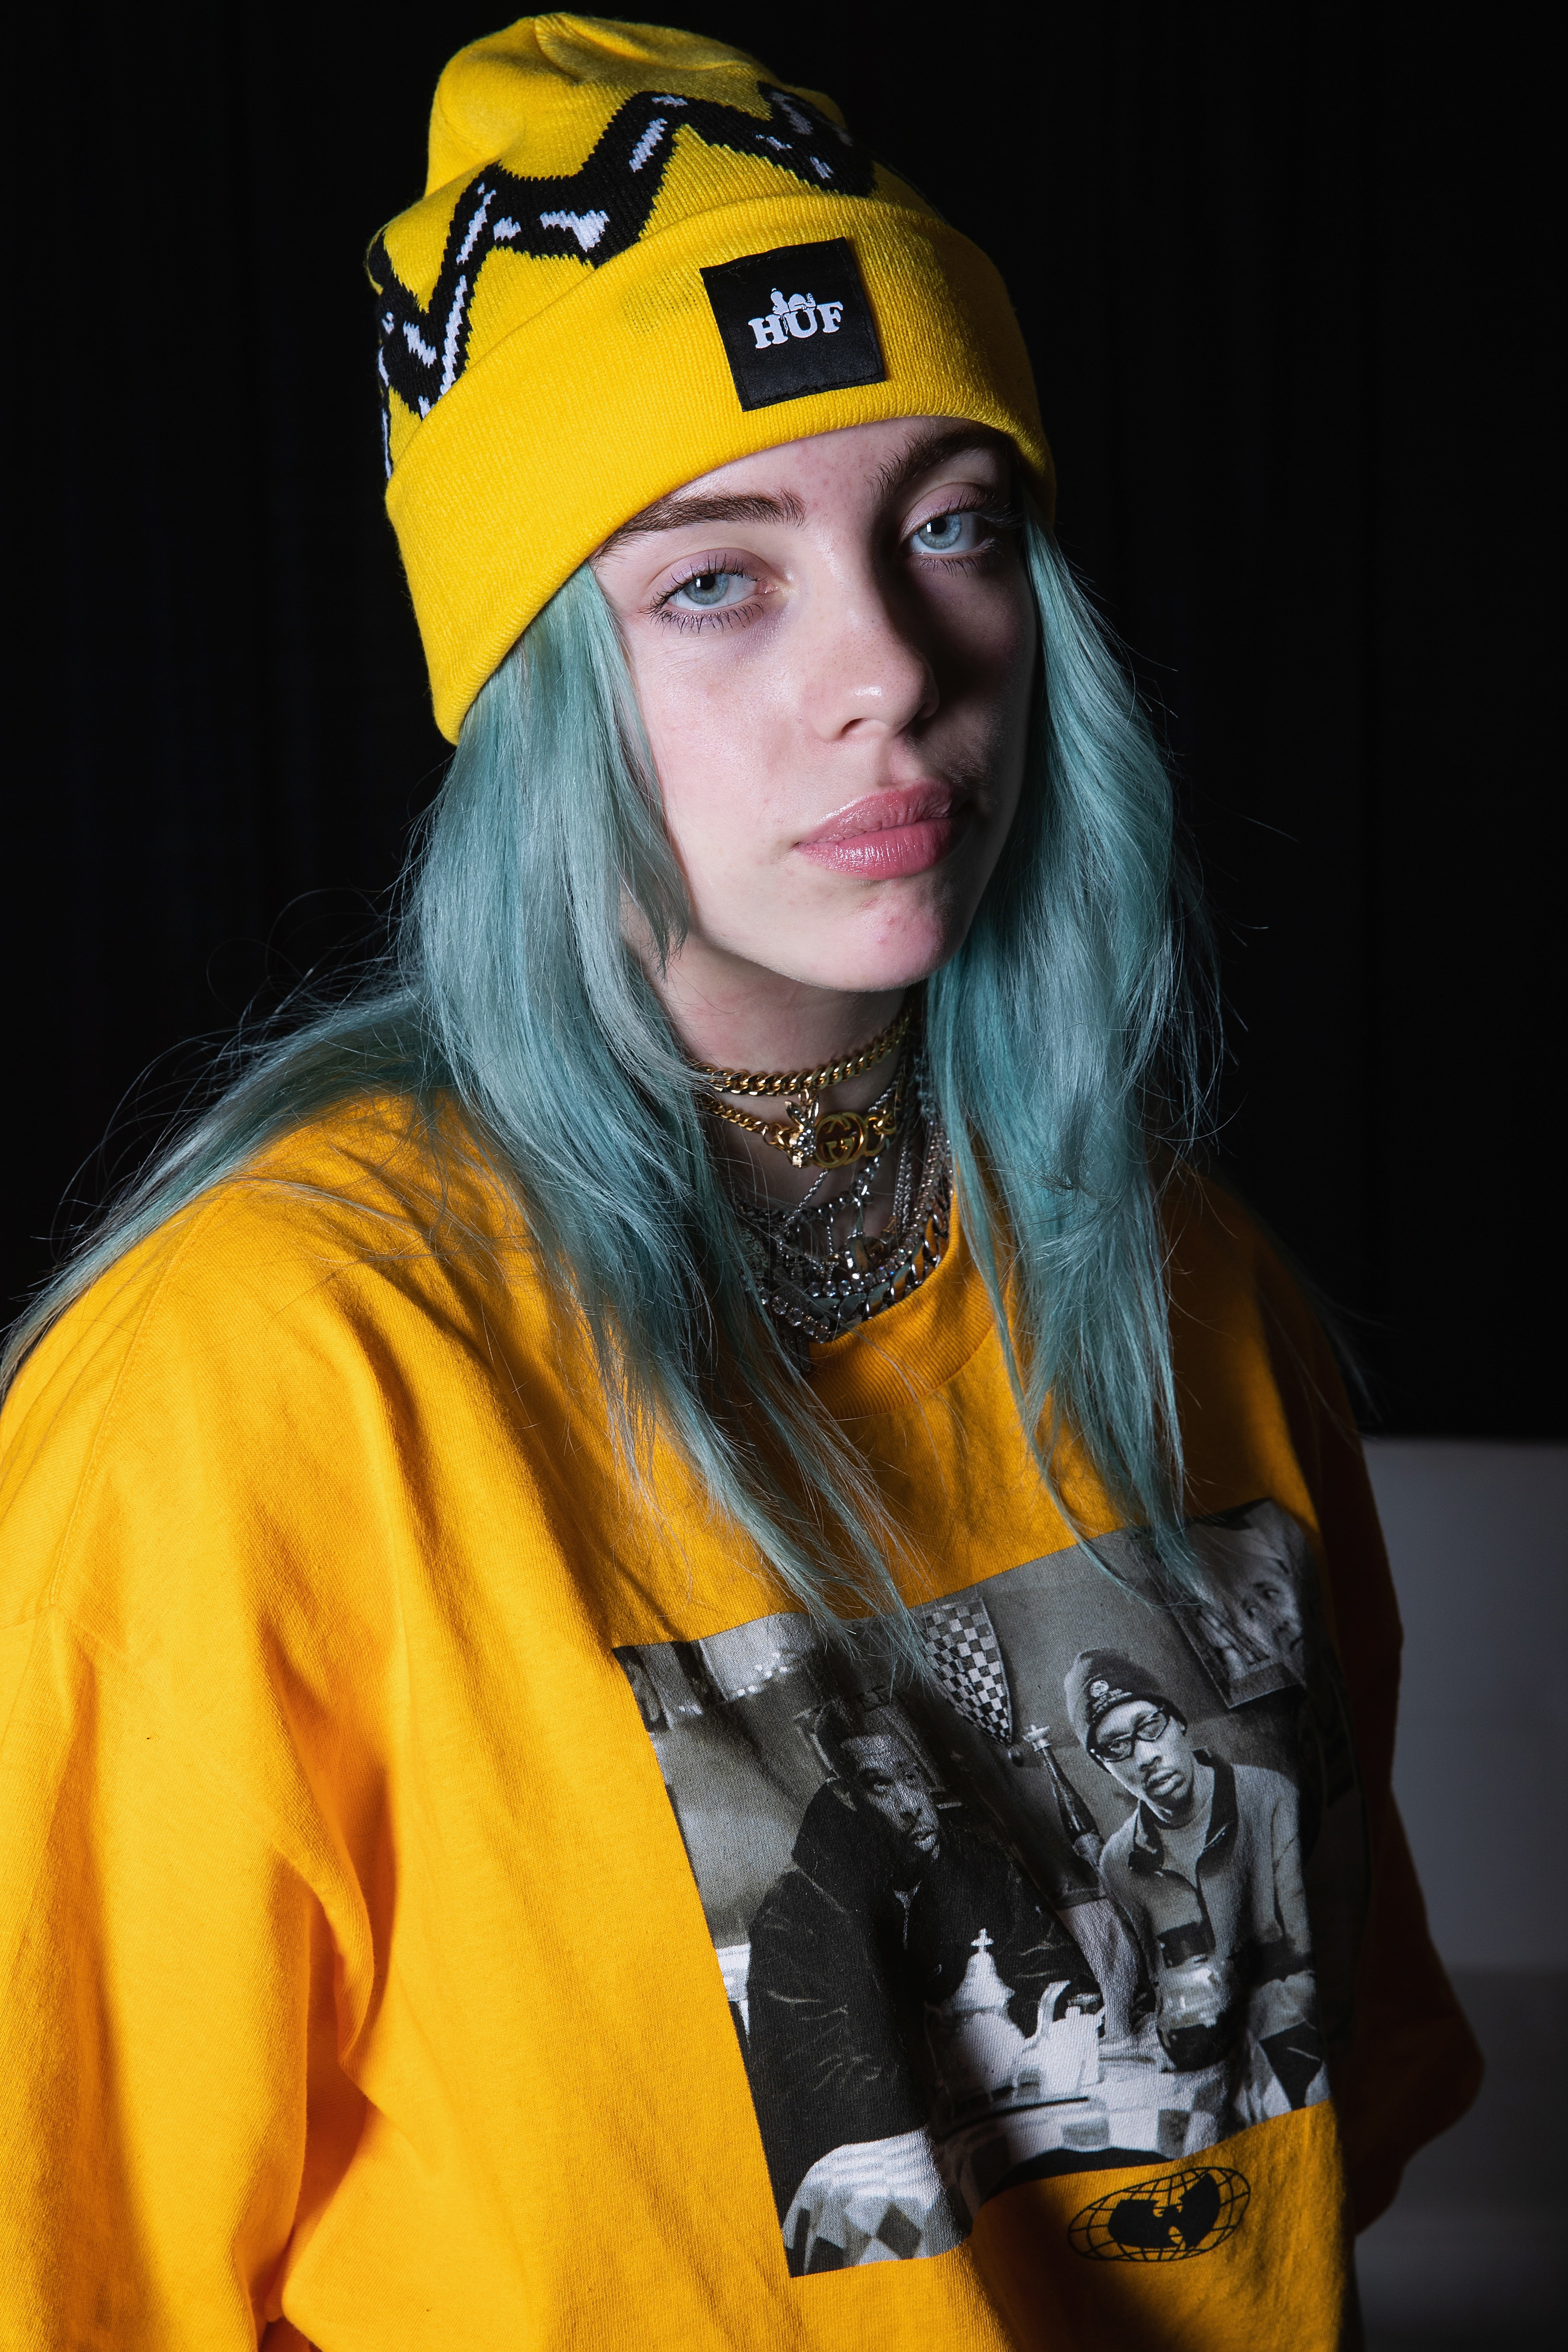 Billie Eilish: 15 years old but wise beyond her years